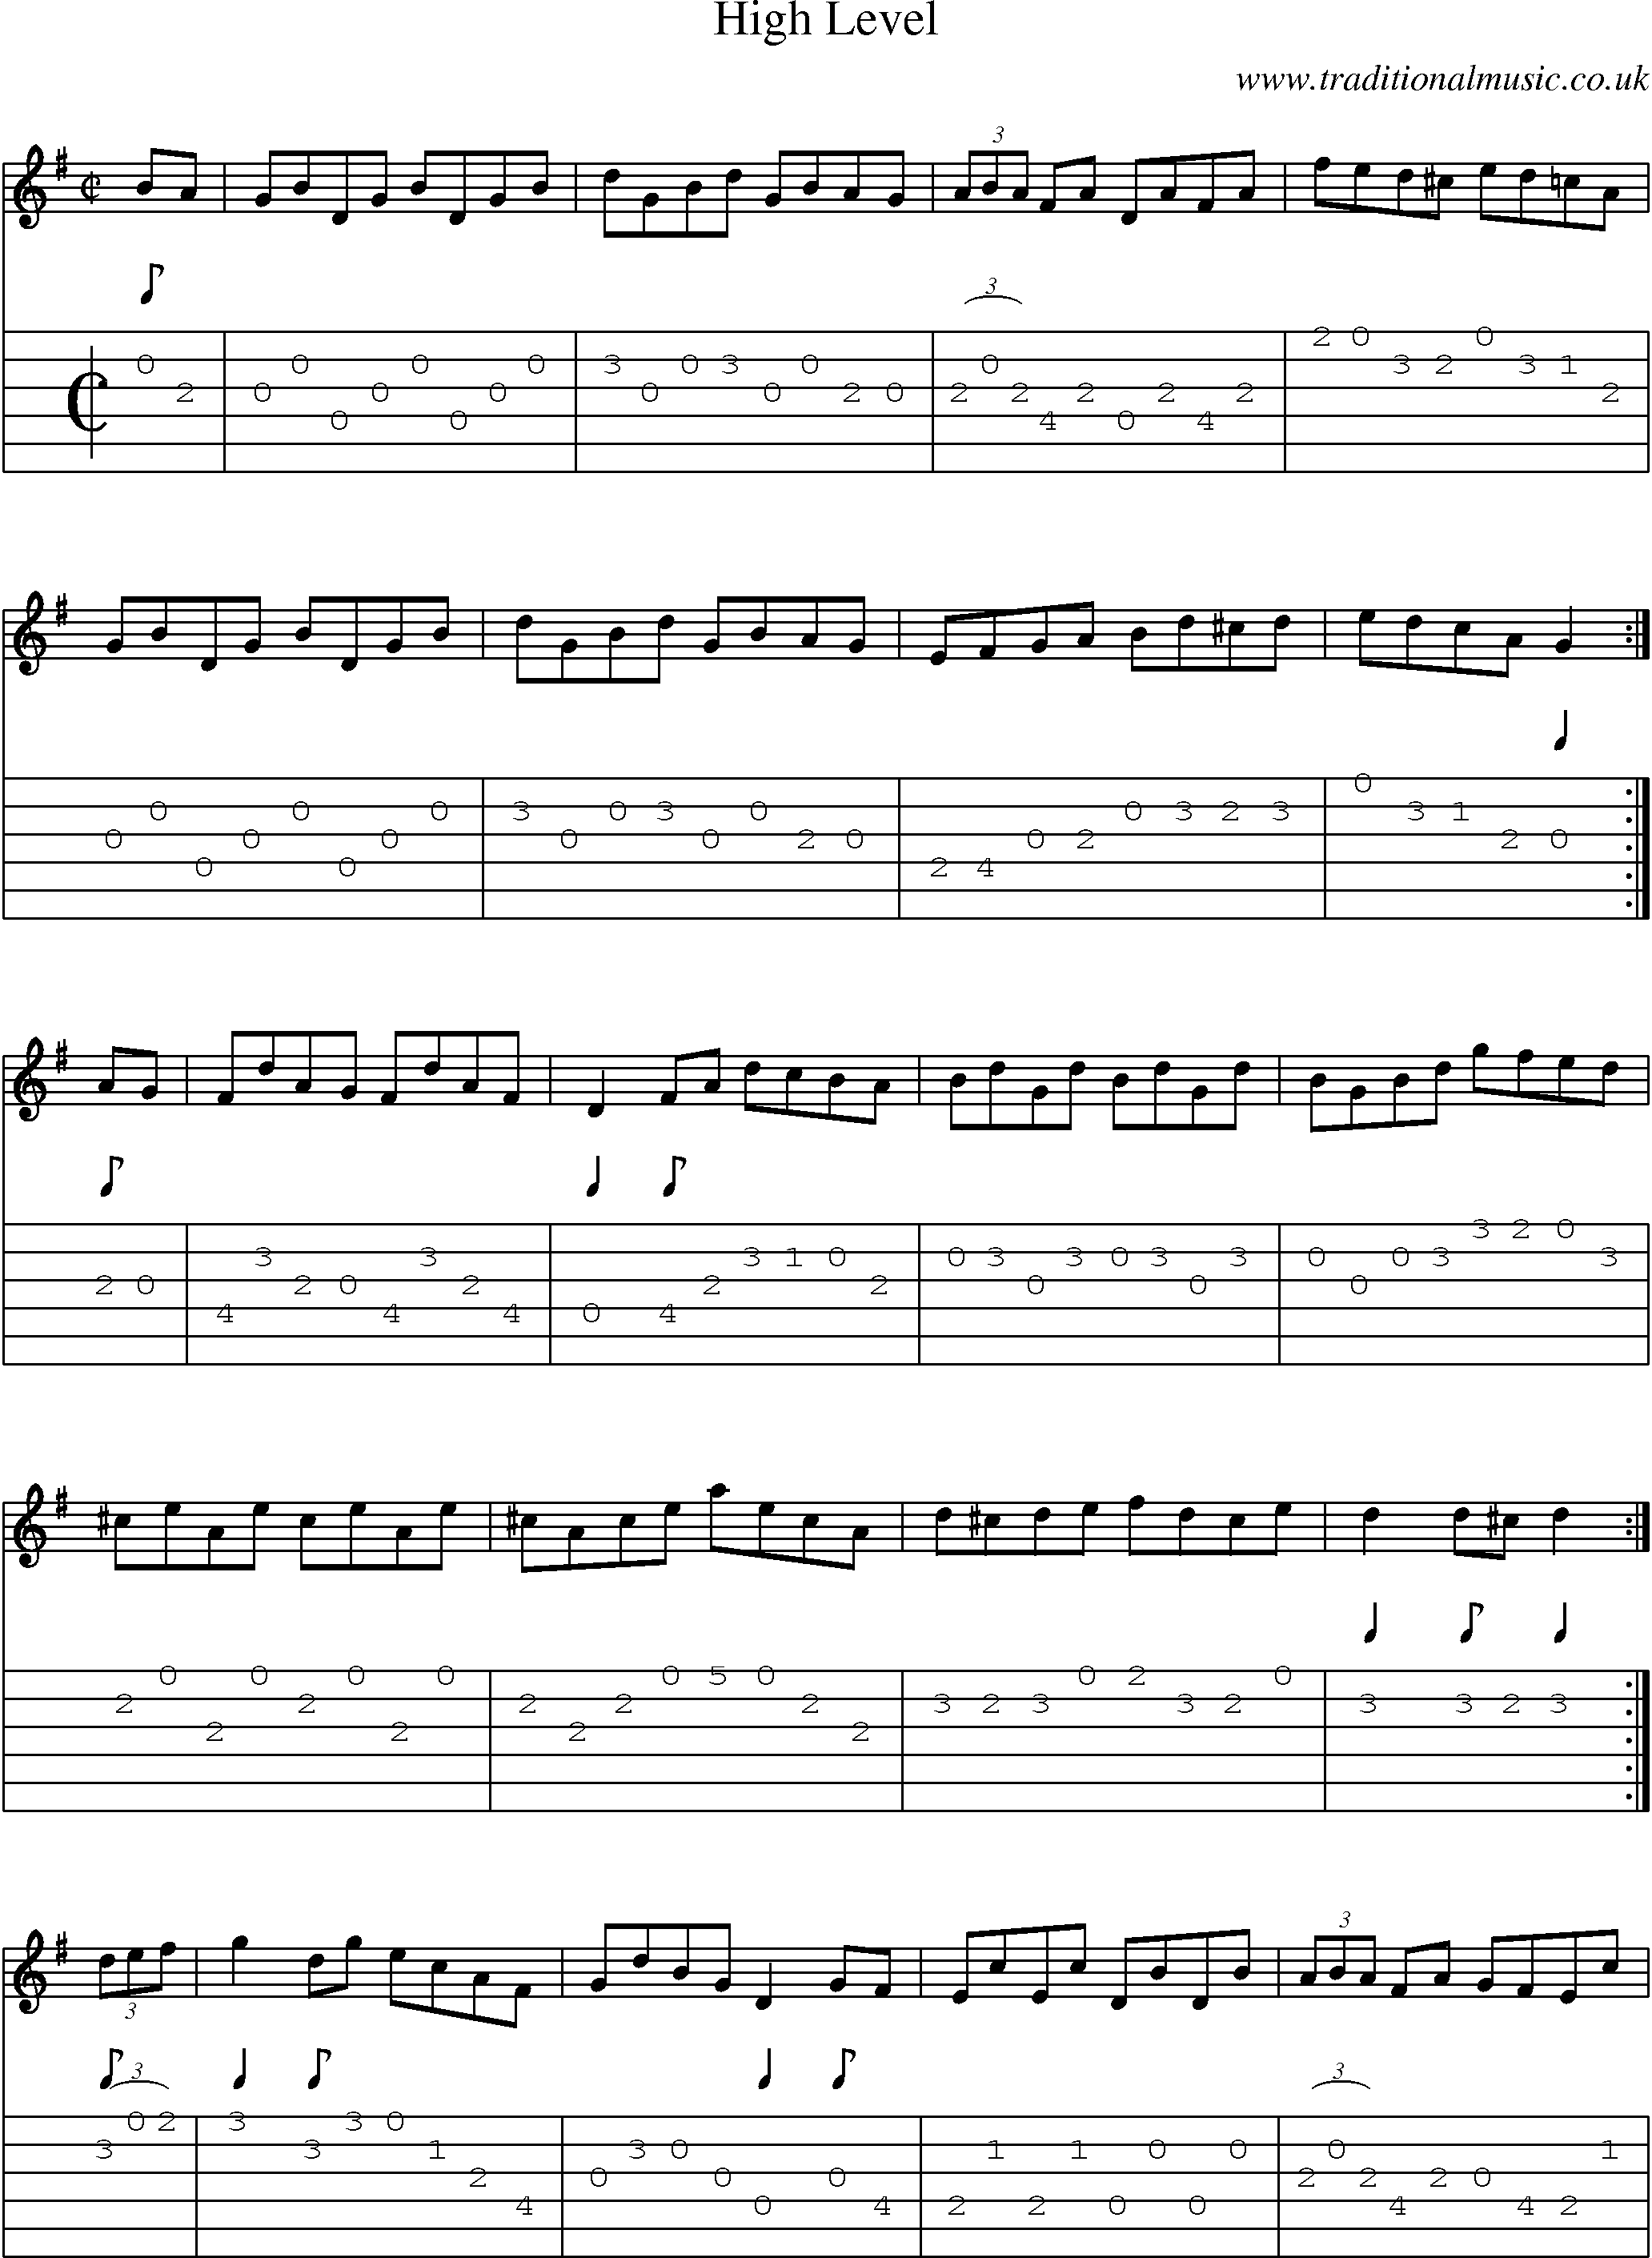 Music Score and Guitar Tabs for High Level